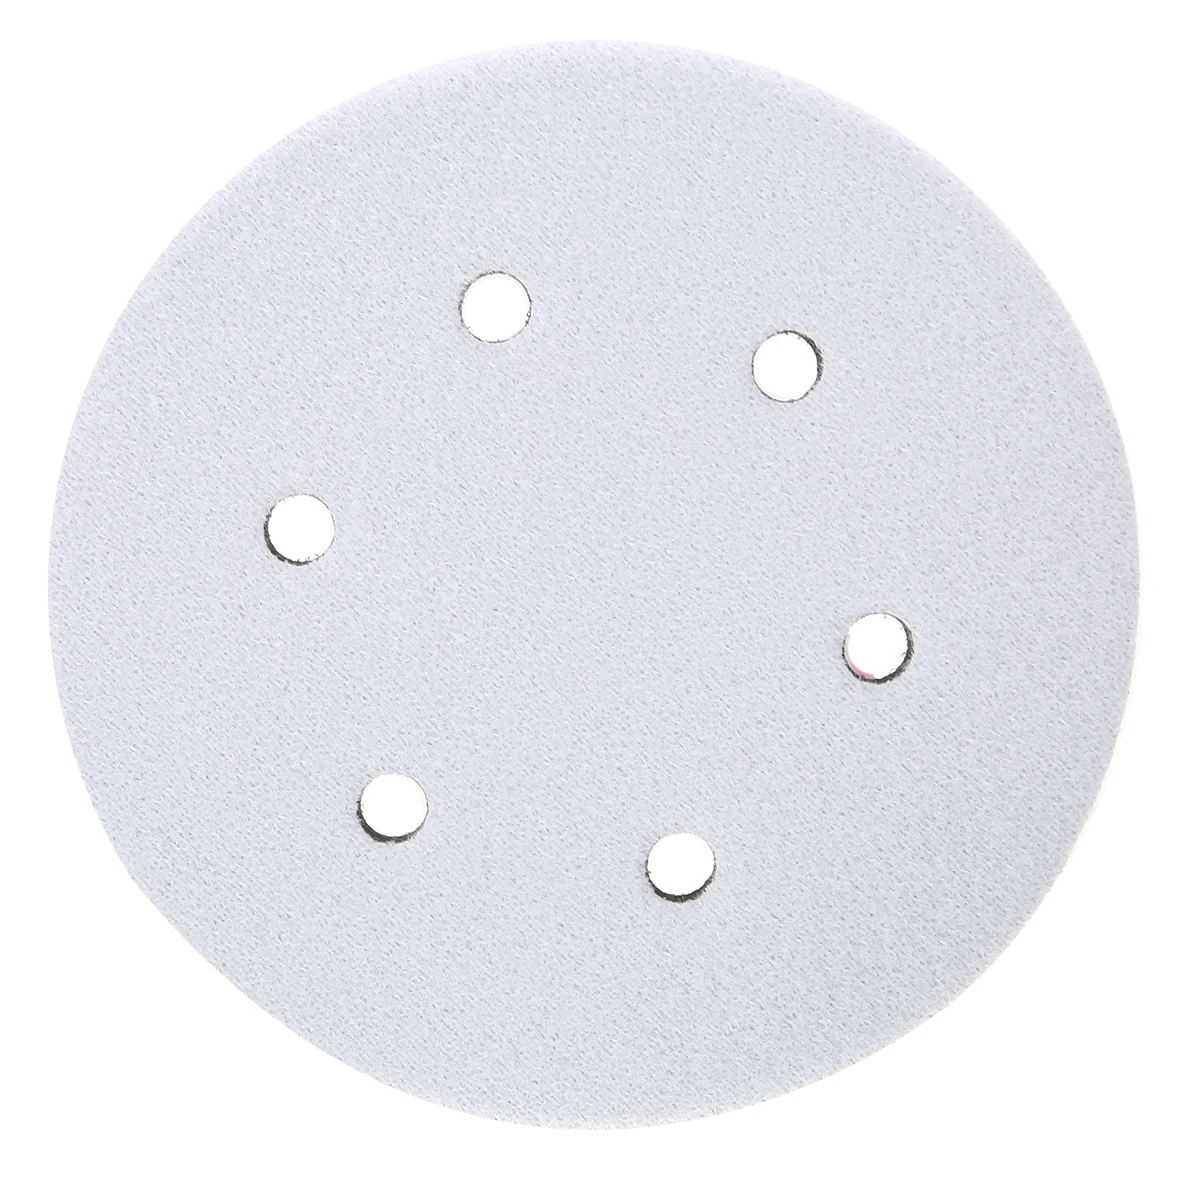 6 Inch 150mm 6 Hole Interface Cushion Pad Hook and Loop Foam Backing Pad for Protecting Sanding Disc Power Sander Accessories